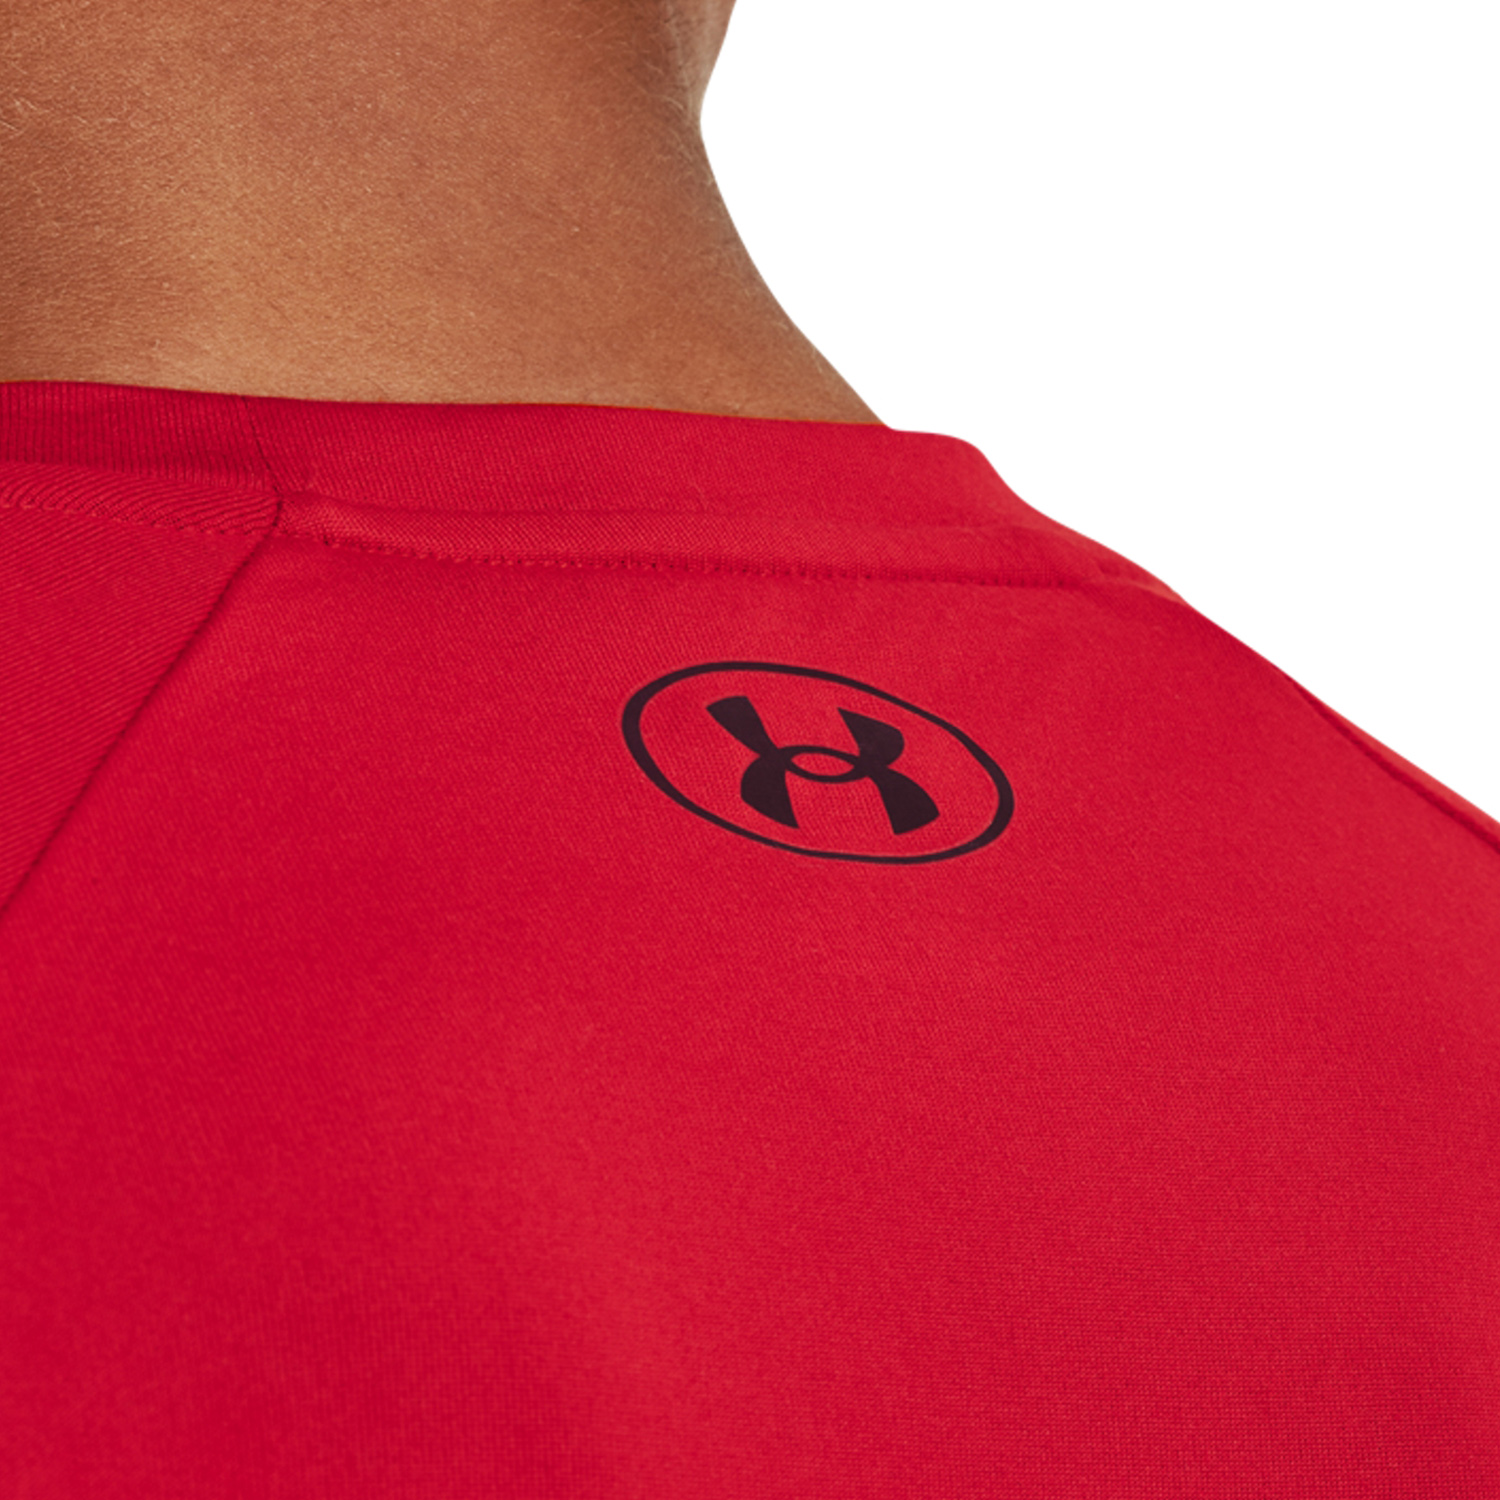 Under Armour Tech Fill T-Shirt - Red/Deed Red